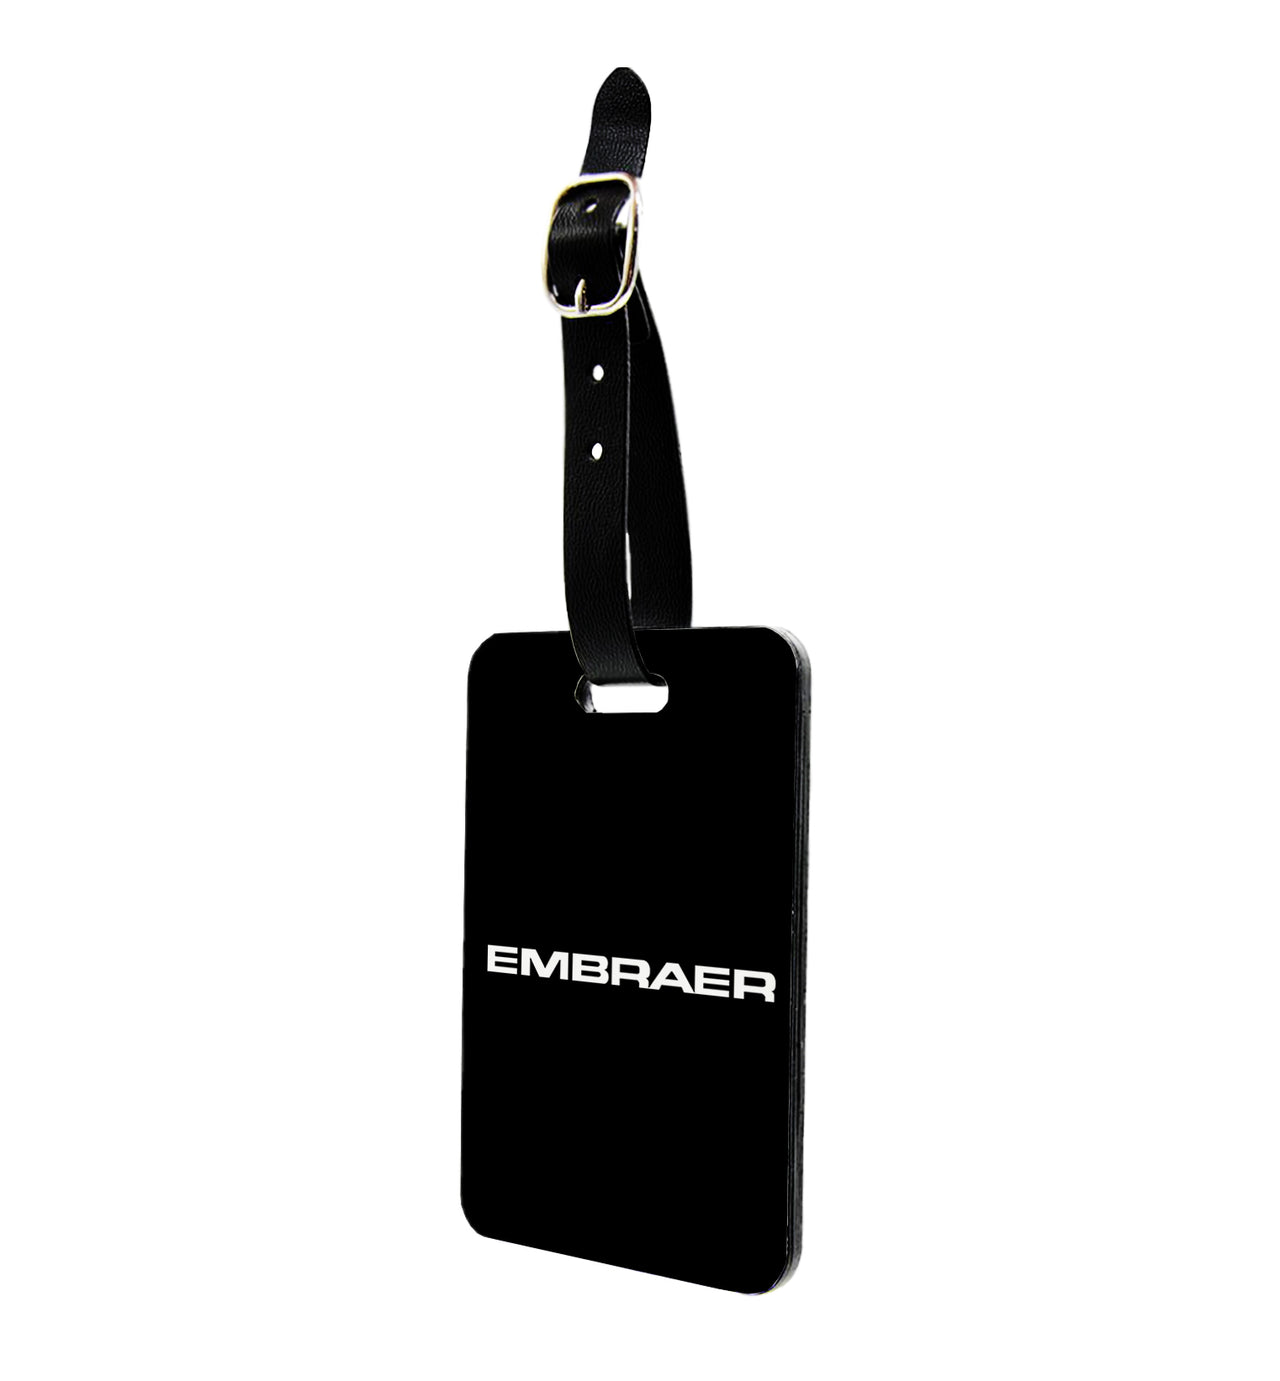 Embraer & Text Designed Luggage Tag